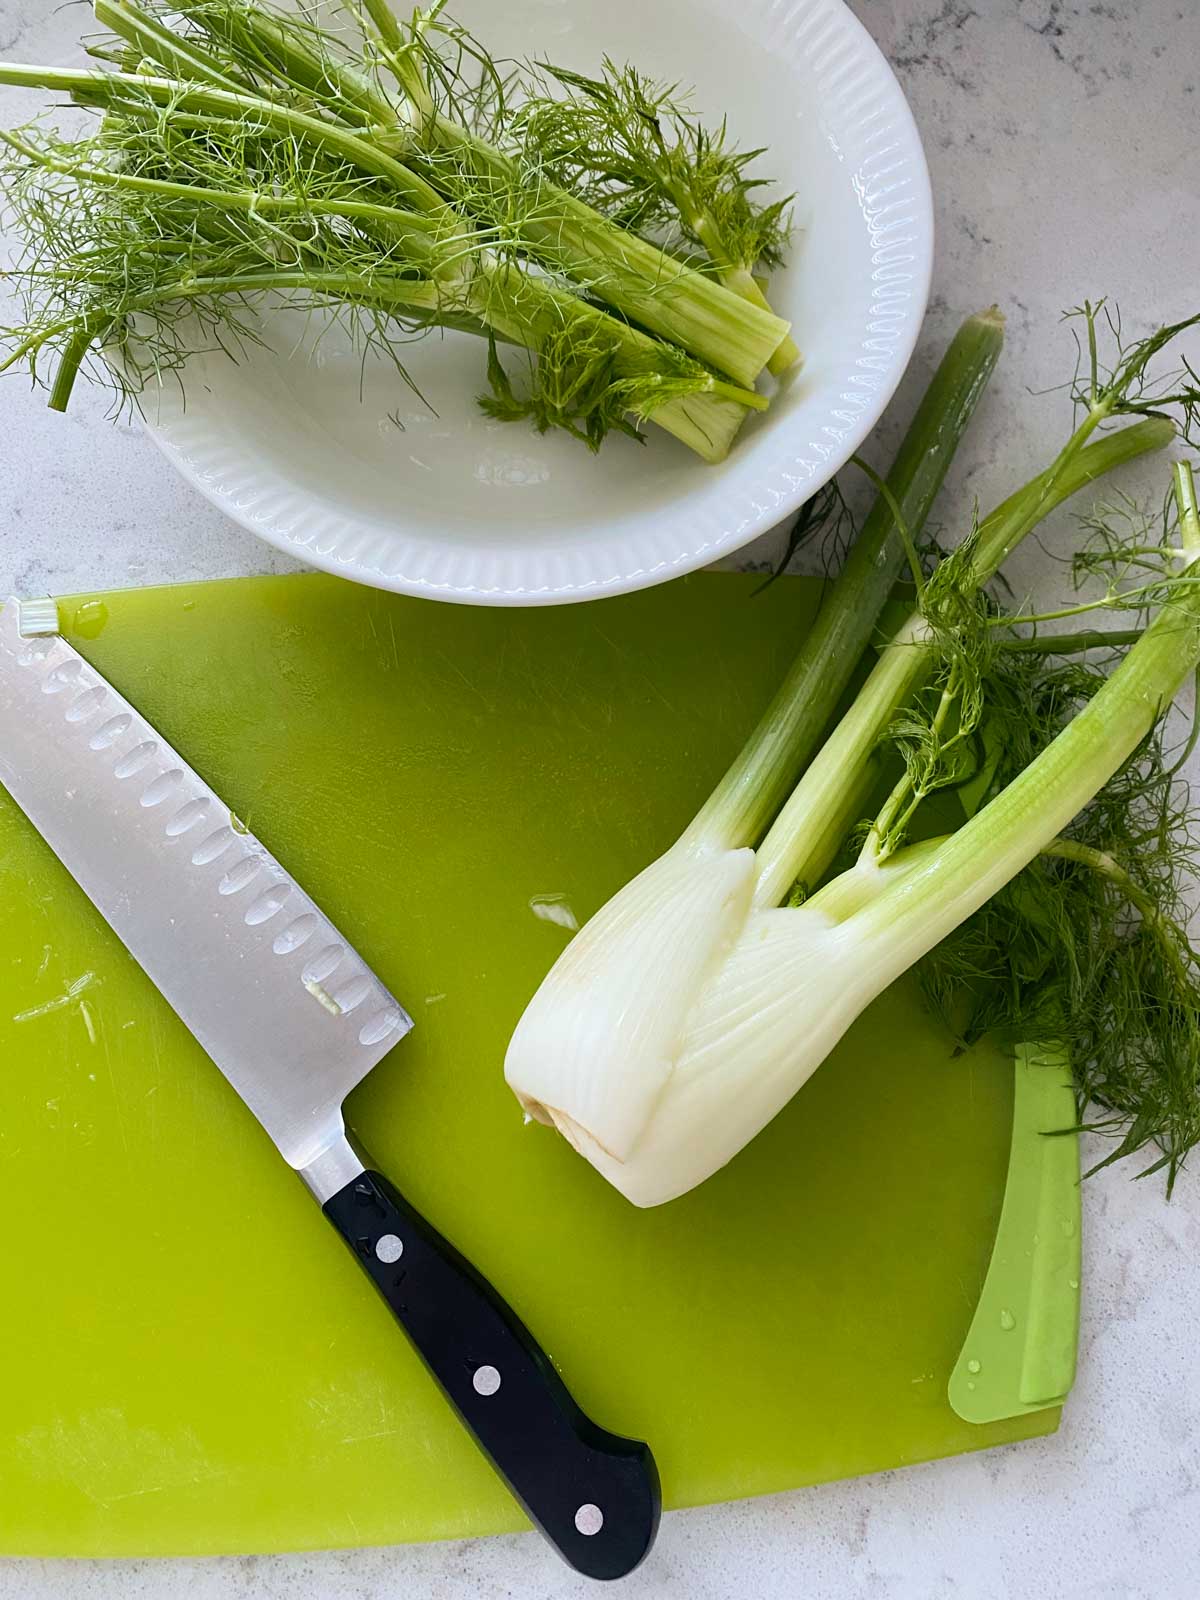 A leek is on a cutting board next to a knife.